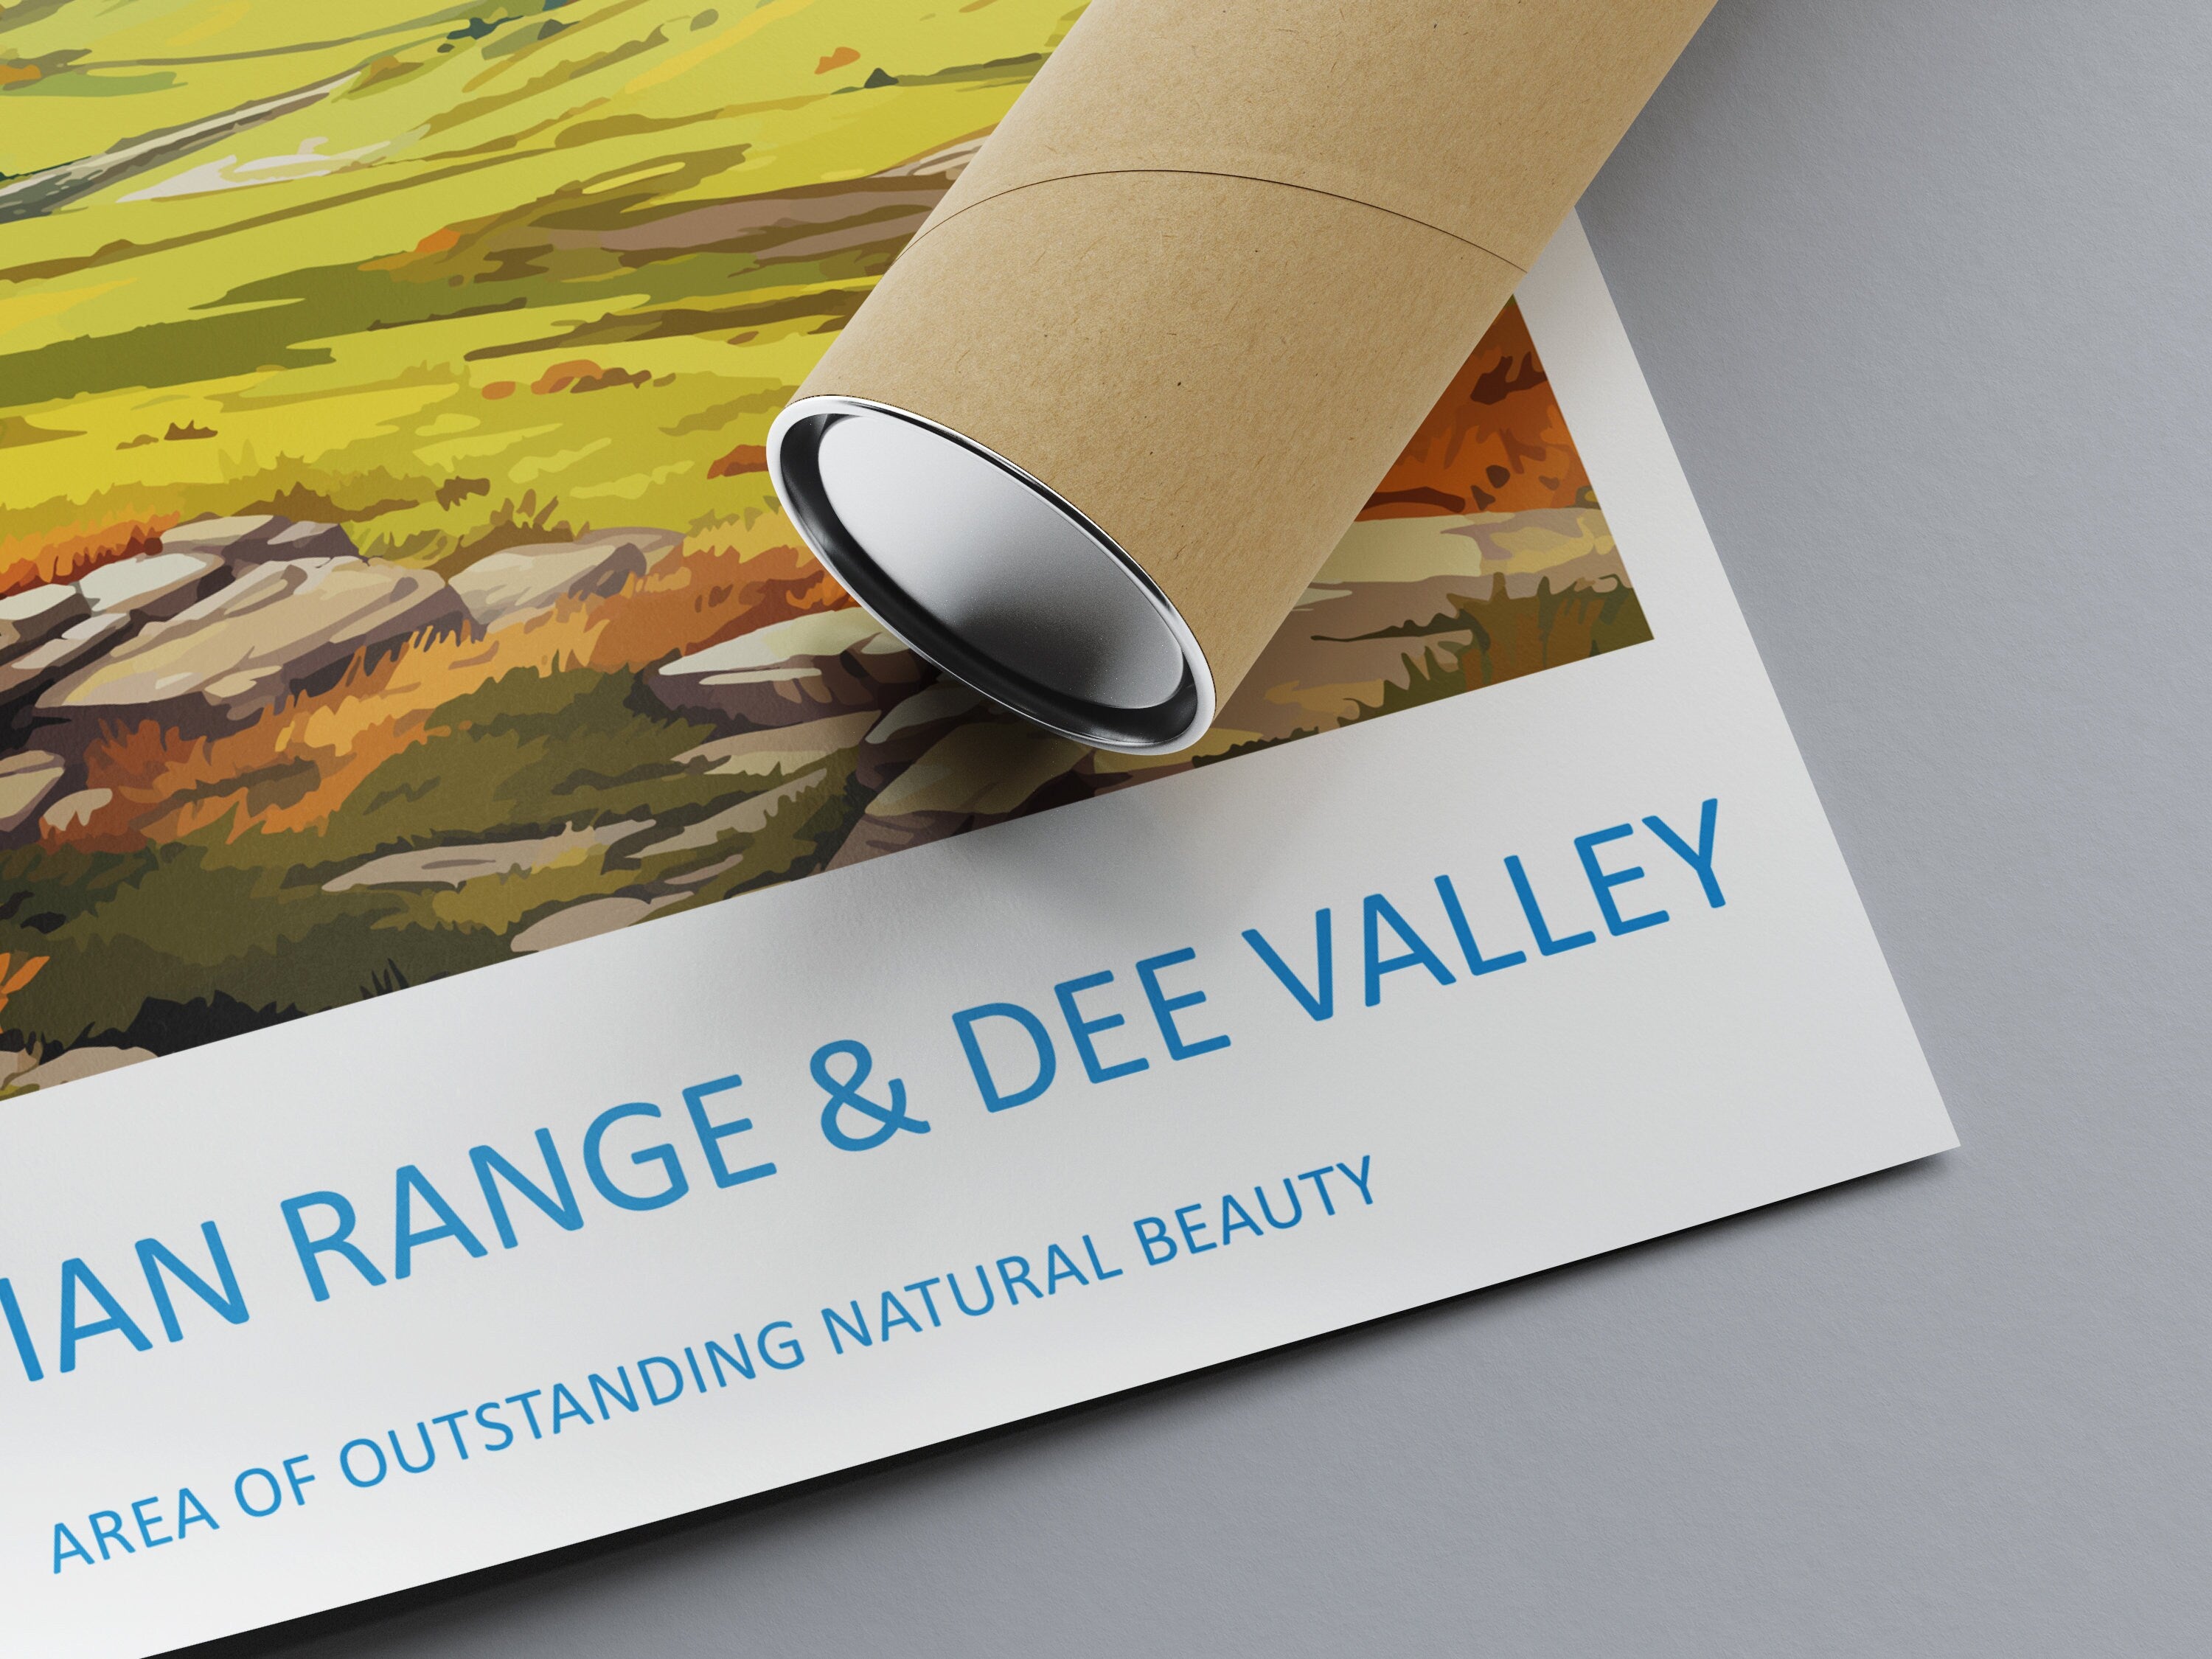 Clwydian Range and Dee Valley Travel Print Wall Art Clwydian Range and Dee Valley Wall Hanging Home Decor Clwydian Range and Dee Valley AONB